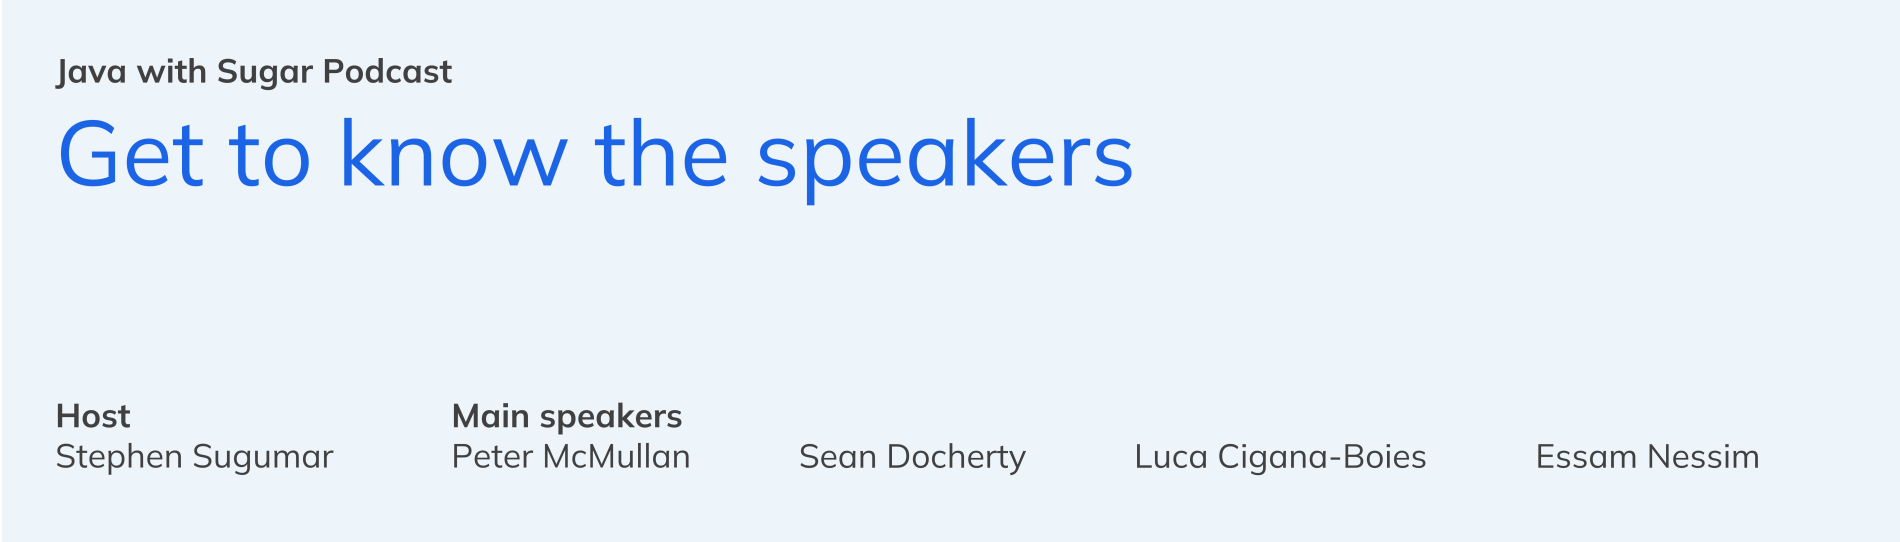 podcast get to know the speakers